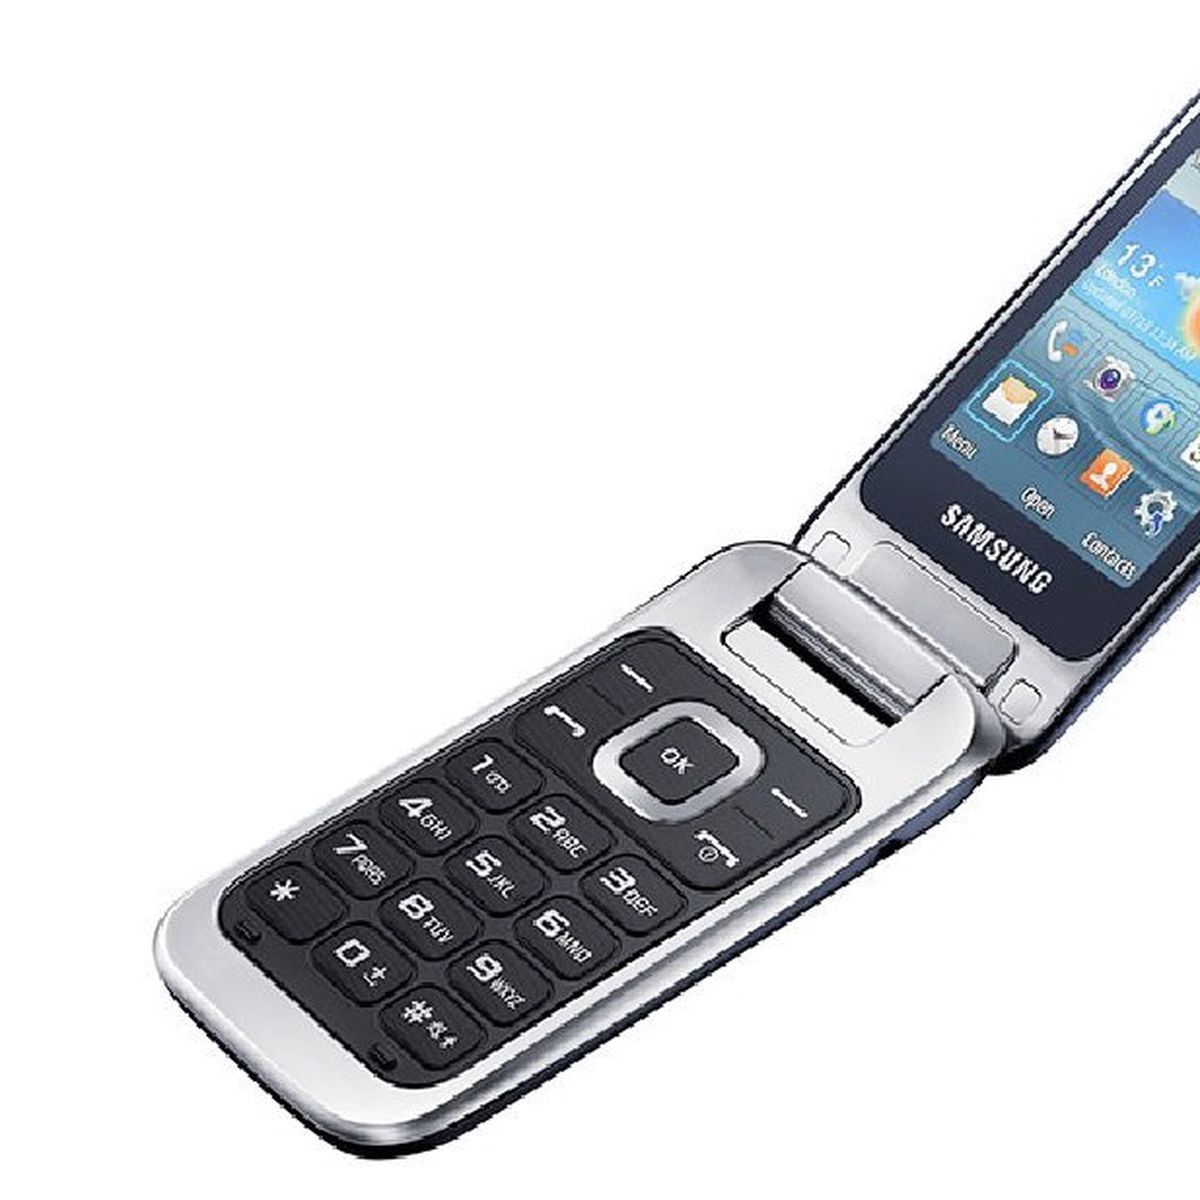 Samsung Plans to Launch a Flip Phone-Style Device With 6.7-inch Bendable  Display Early Next Year - MacRumors